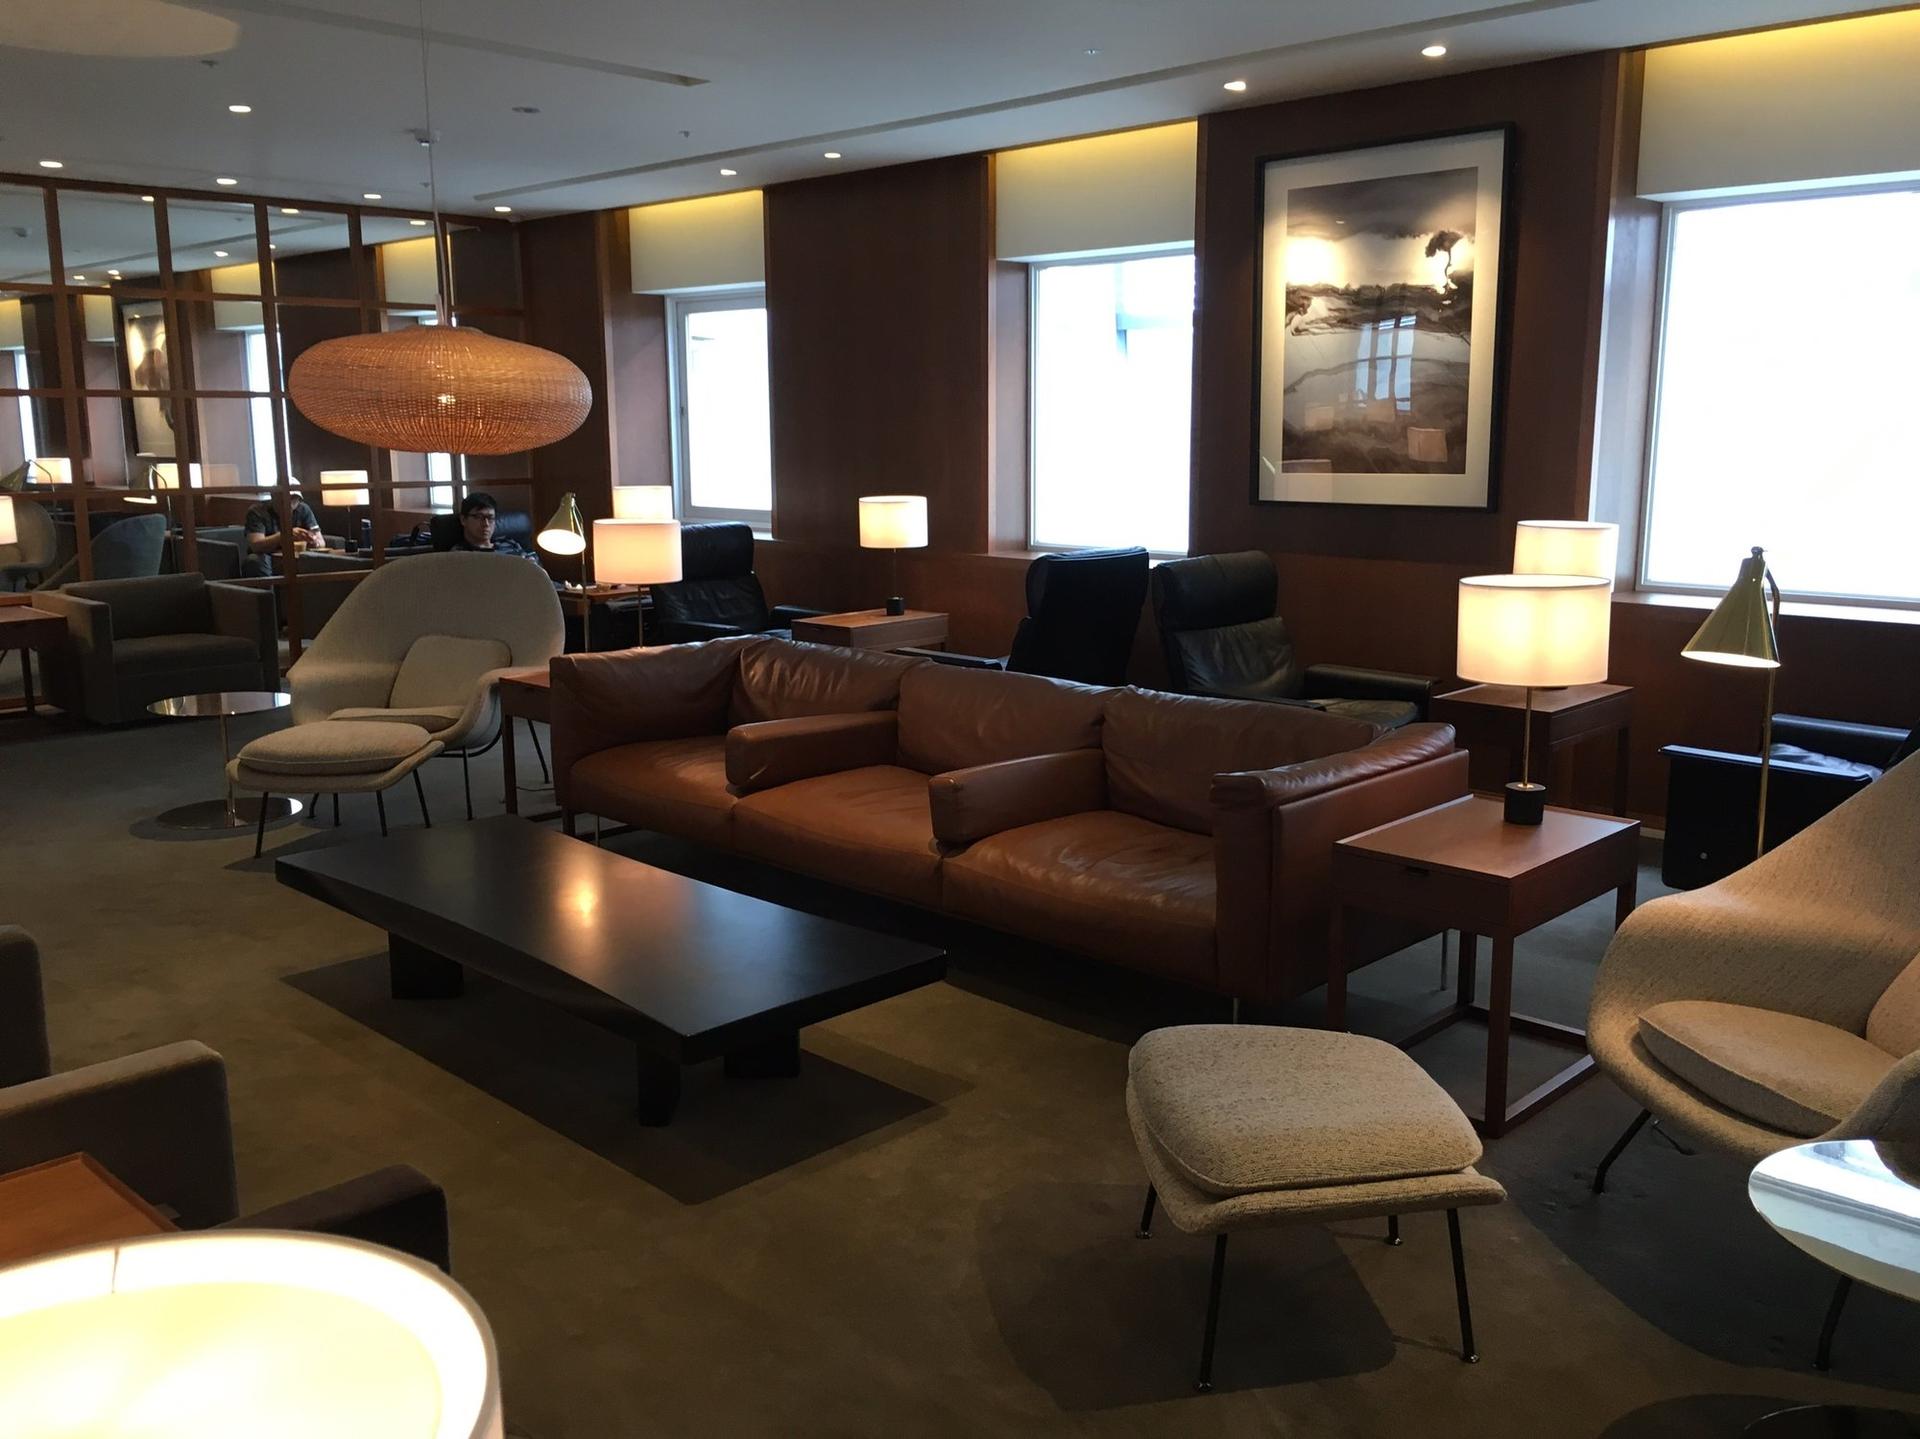 Cathay Pacific Lounge image 17 of 37